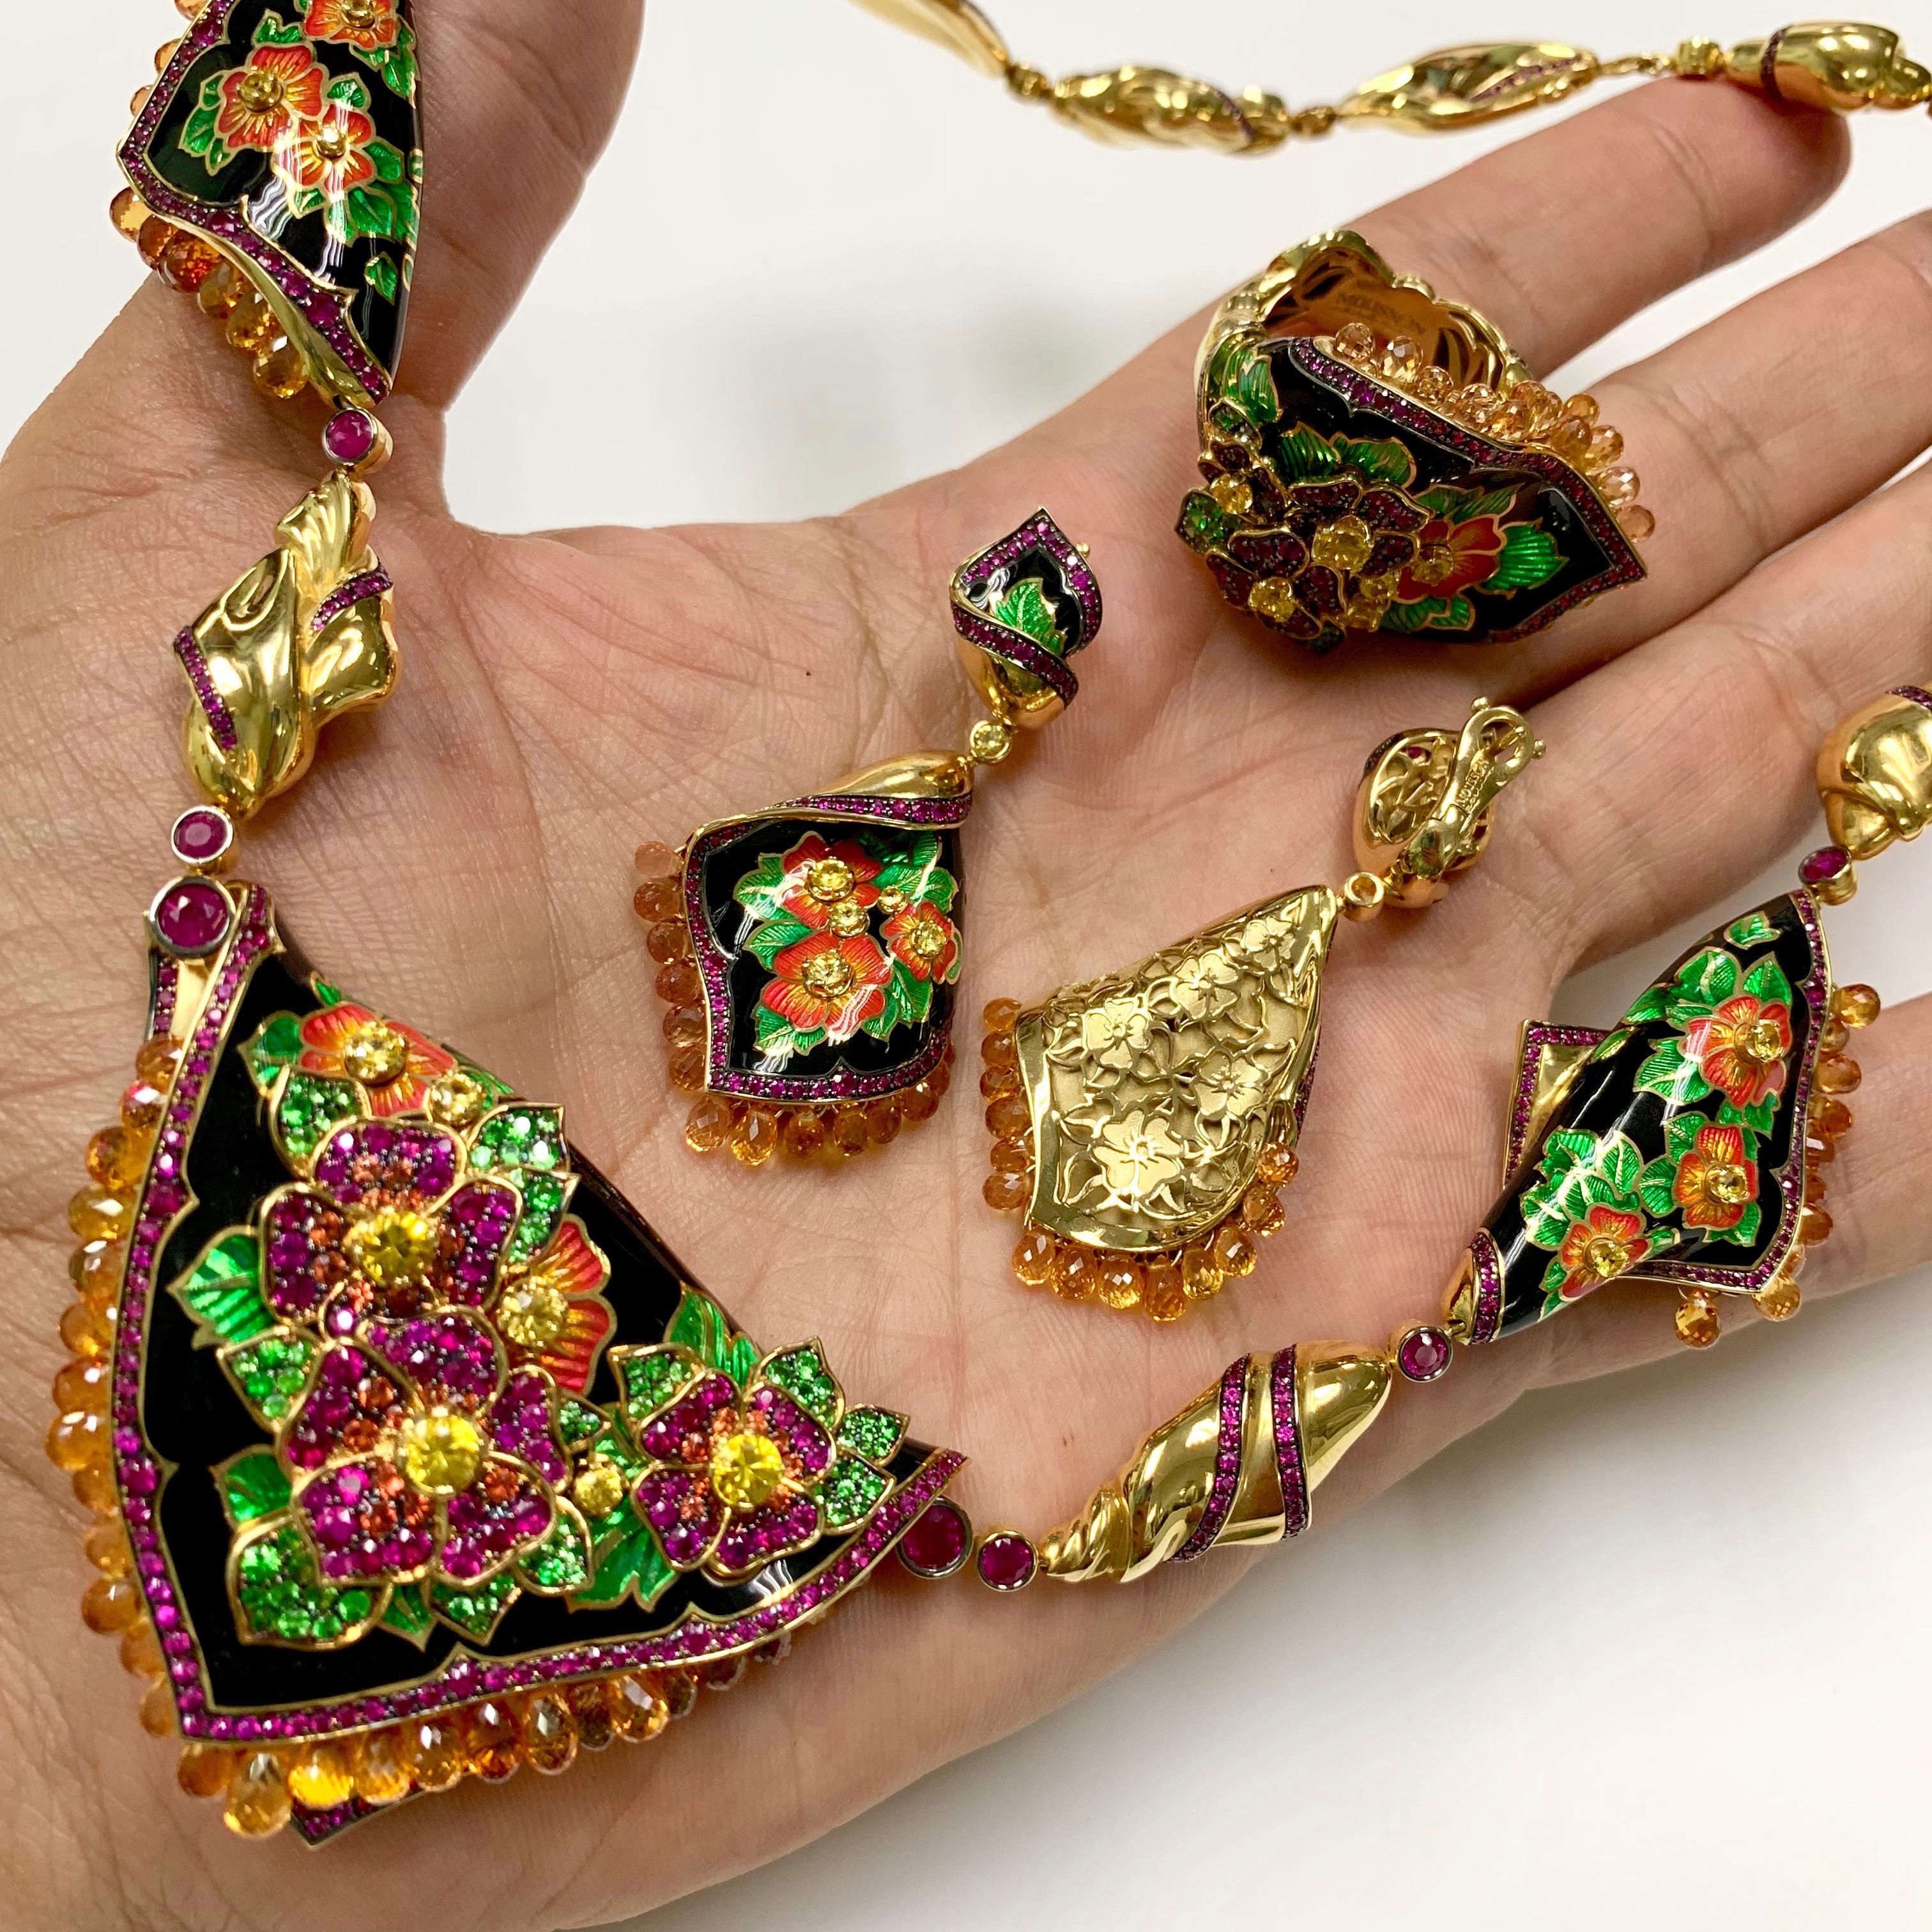 Ruby Yellow Sapphire Tsavorite Enamel A'la Russe Ring Earring Necklace Suite
What do you know about Pavlovo Posad shawls? This is a large part of Russian culture, which originated in the 17th century. They are large patterned scarves, which are